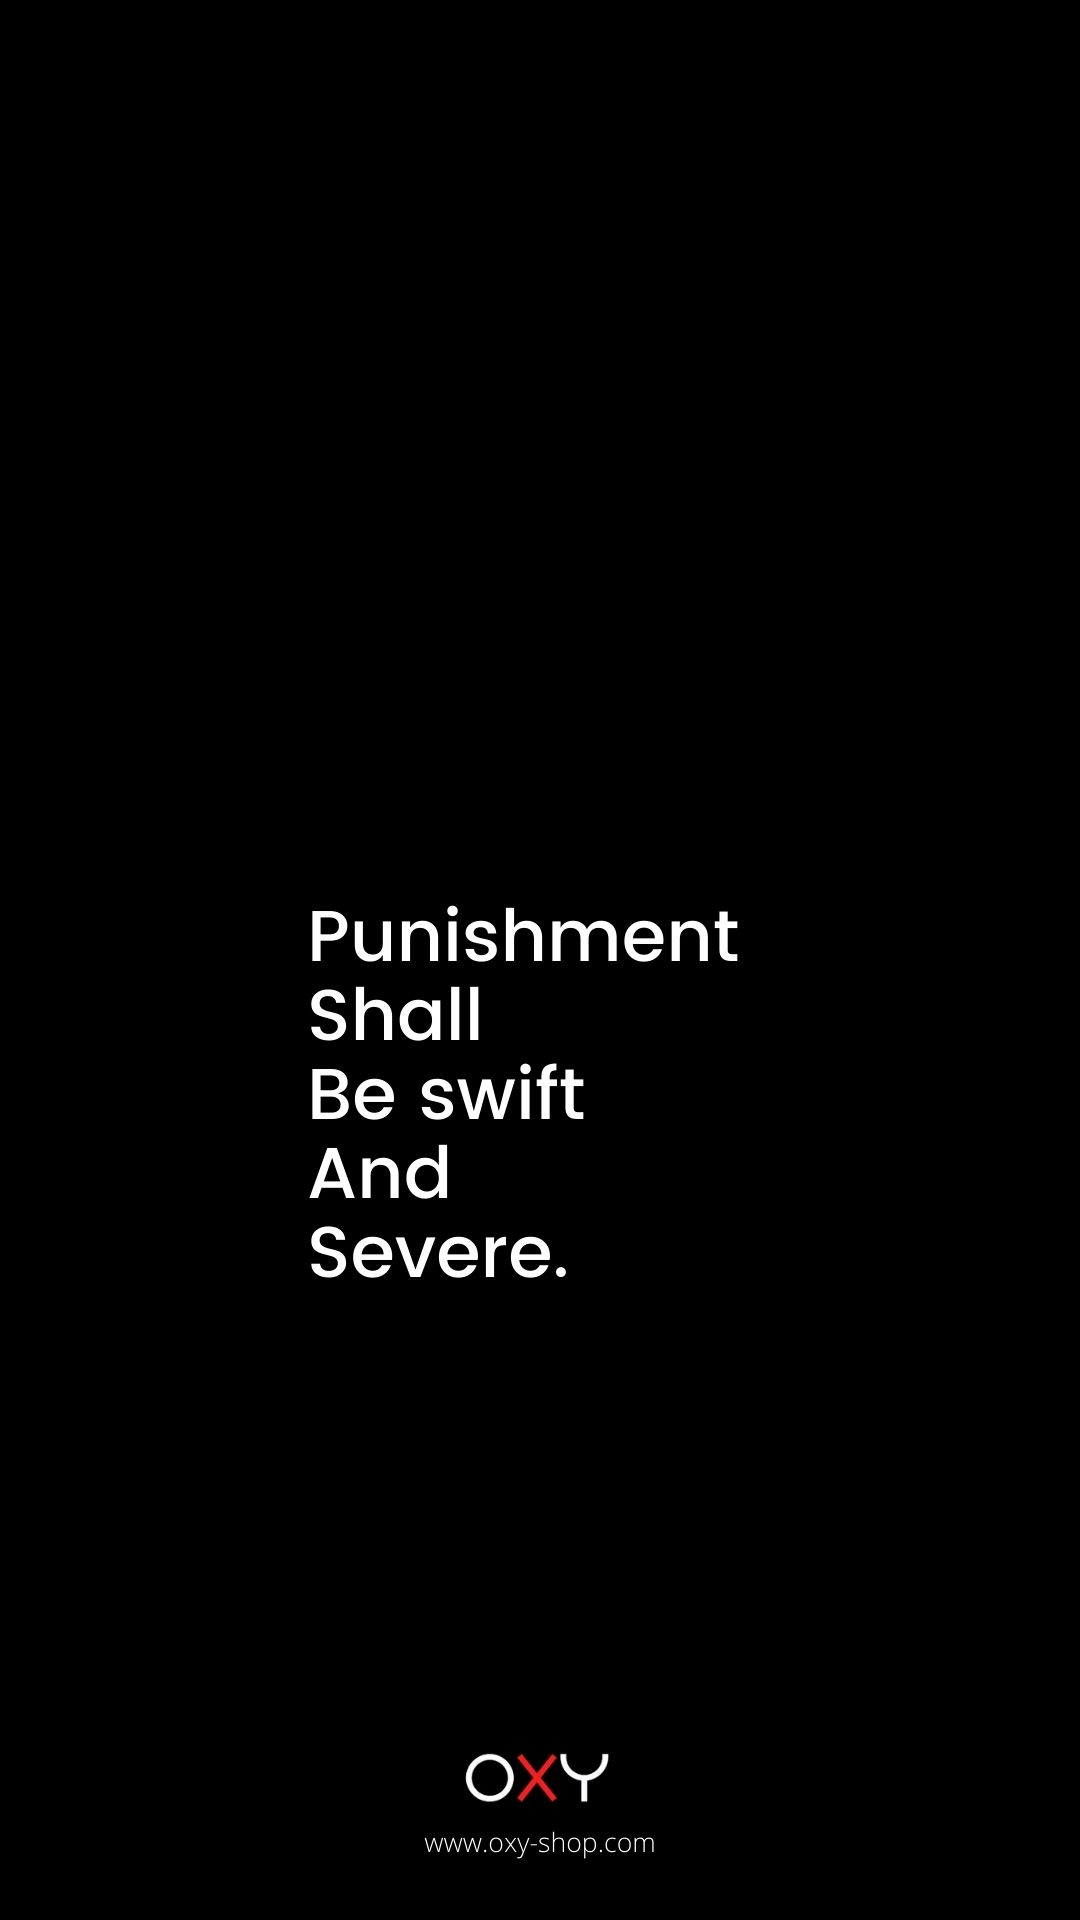 Punishment shall be swift and severe. - BDSM wallpaper